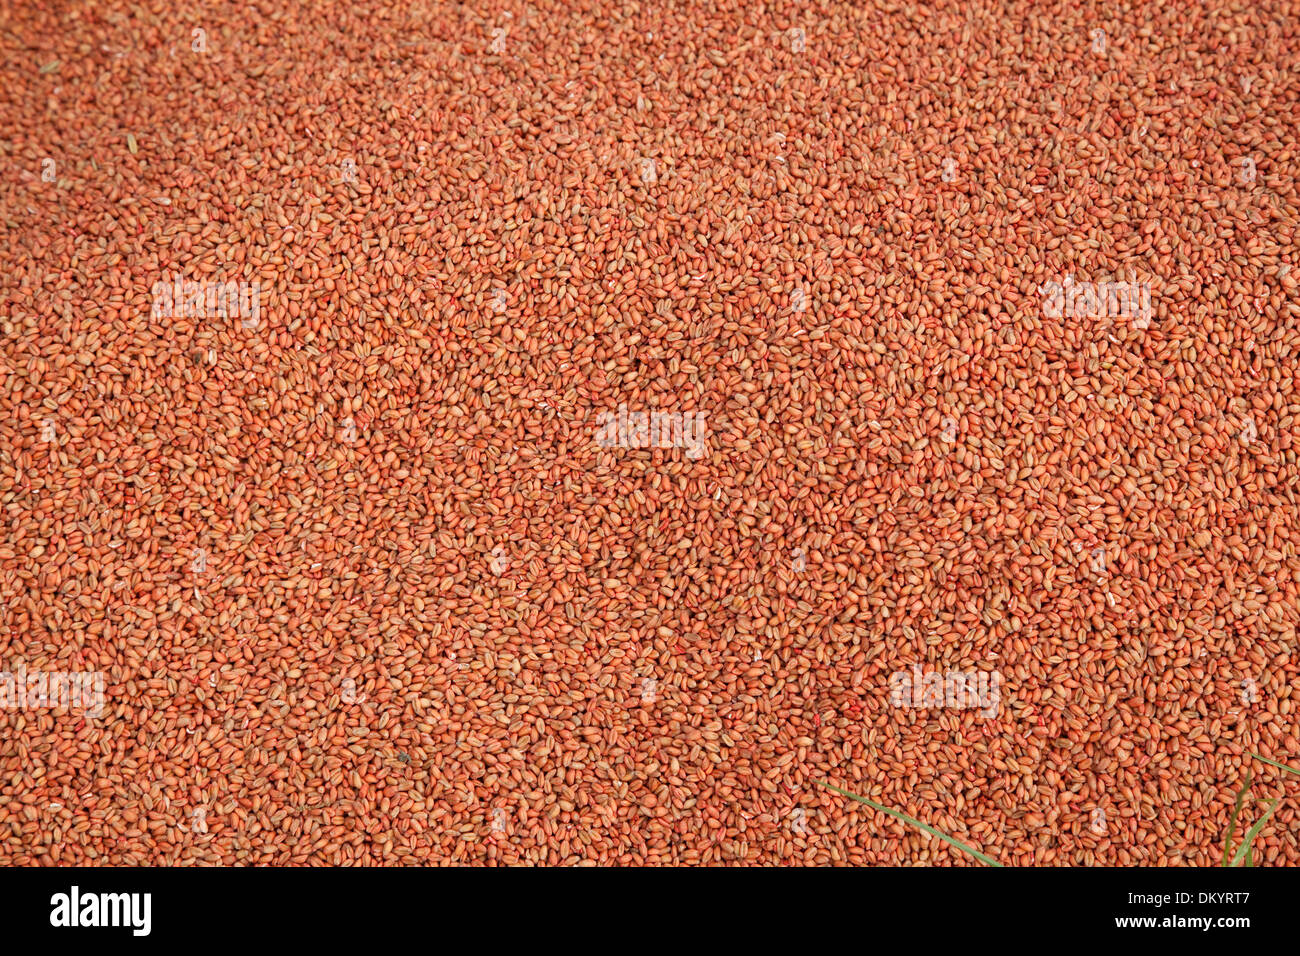 dry and raw wheat as background Stock Photo